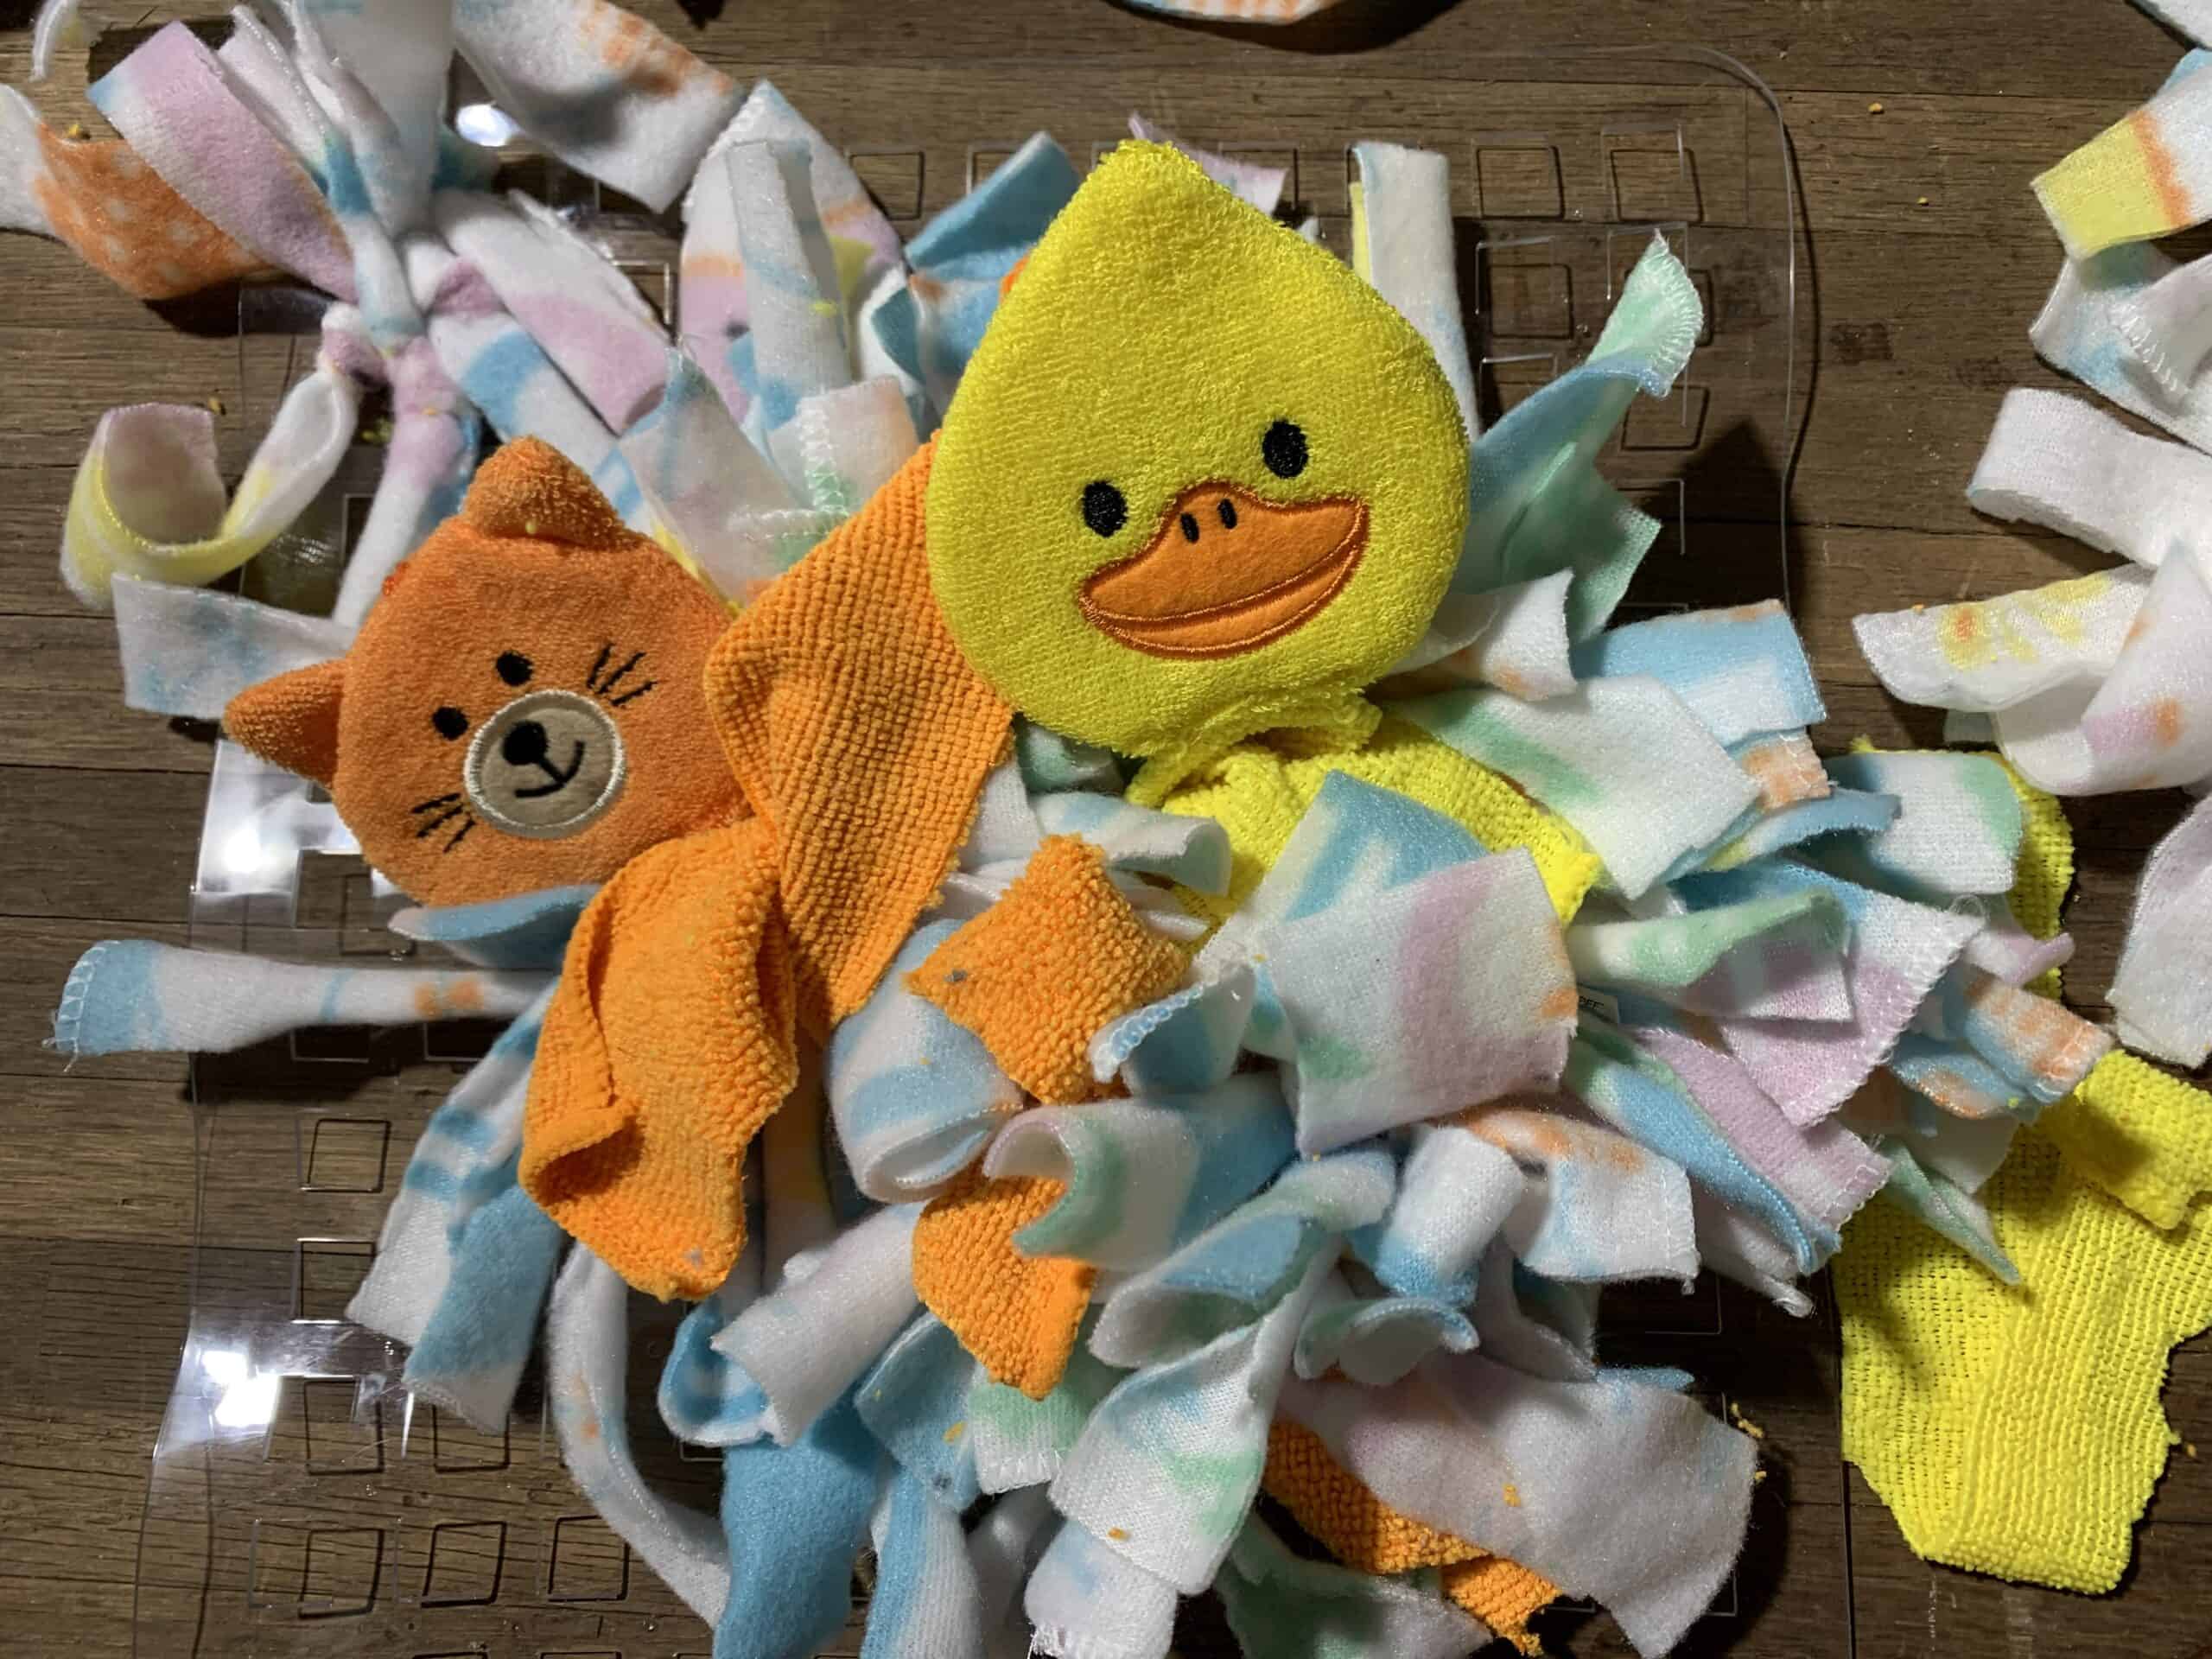 This DIY Snuffle Mat Makes Mealtime Healthier and More Fun